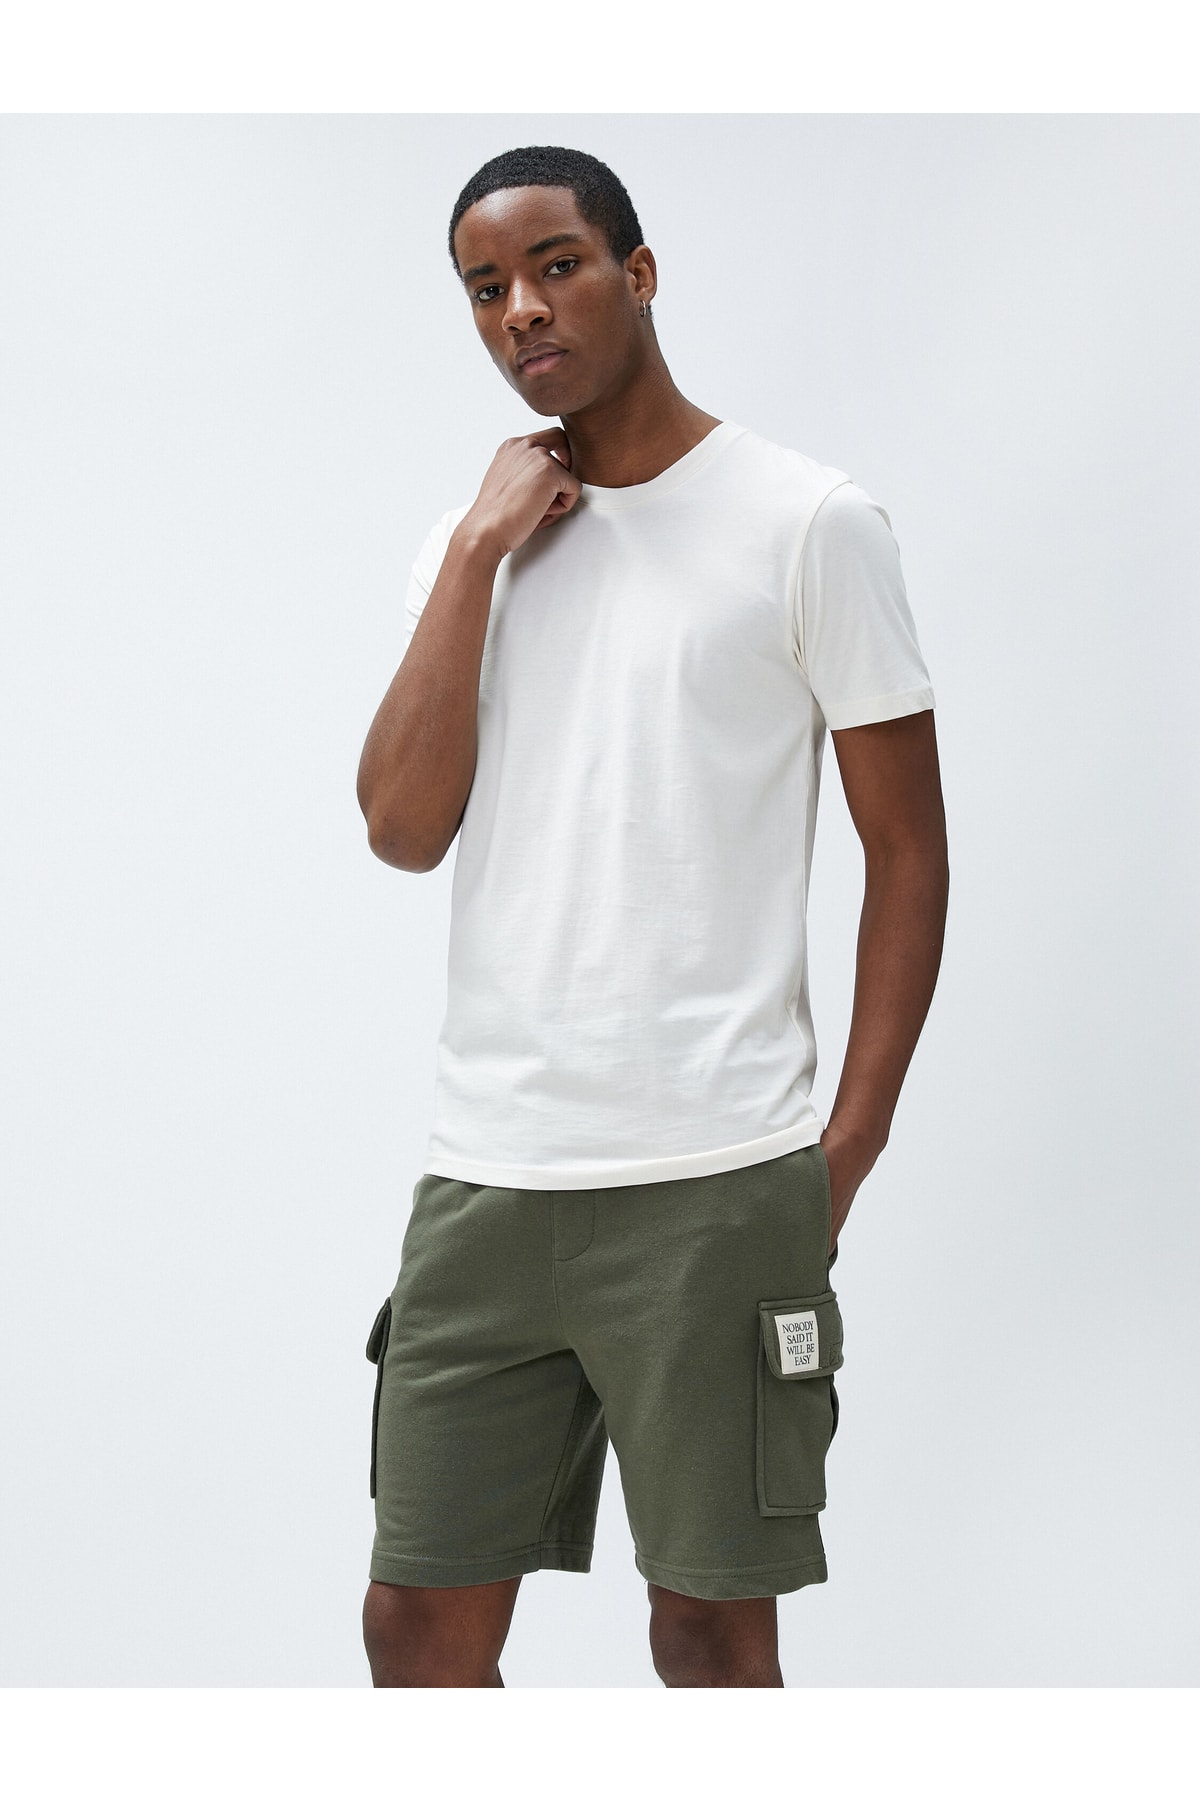 Koton Cargo Shorts with Pocket Detailed Tie Waist, Slim Fit.